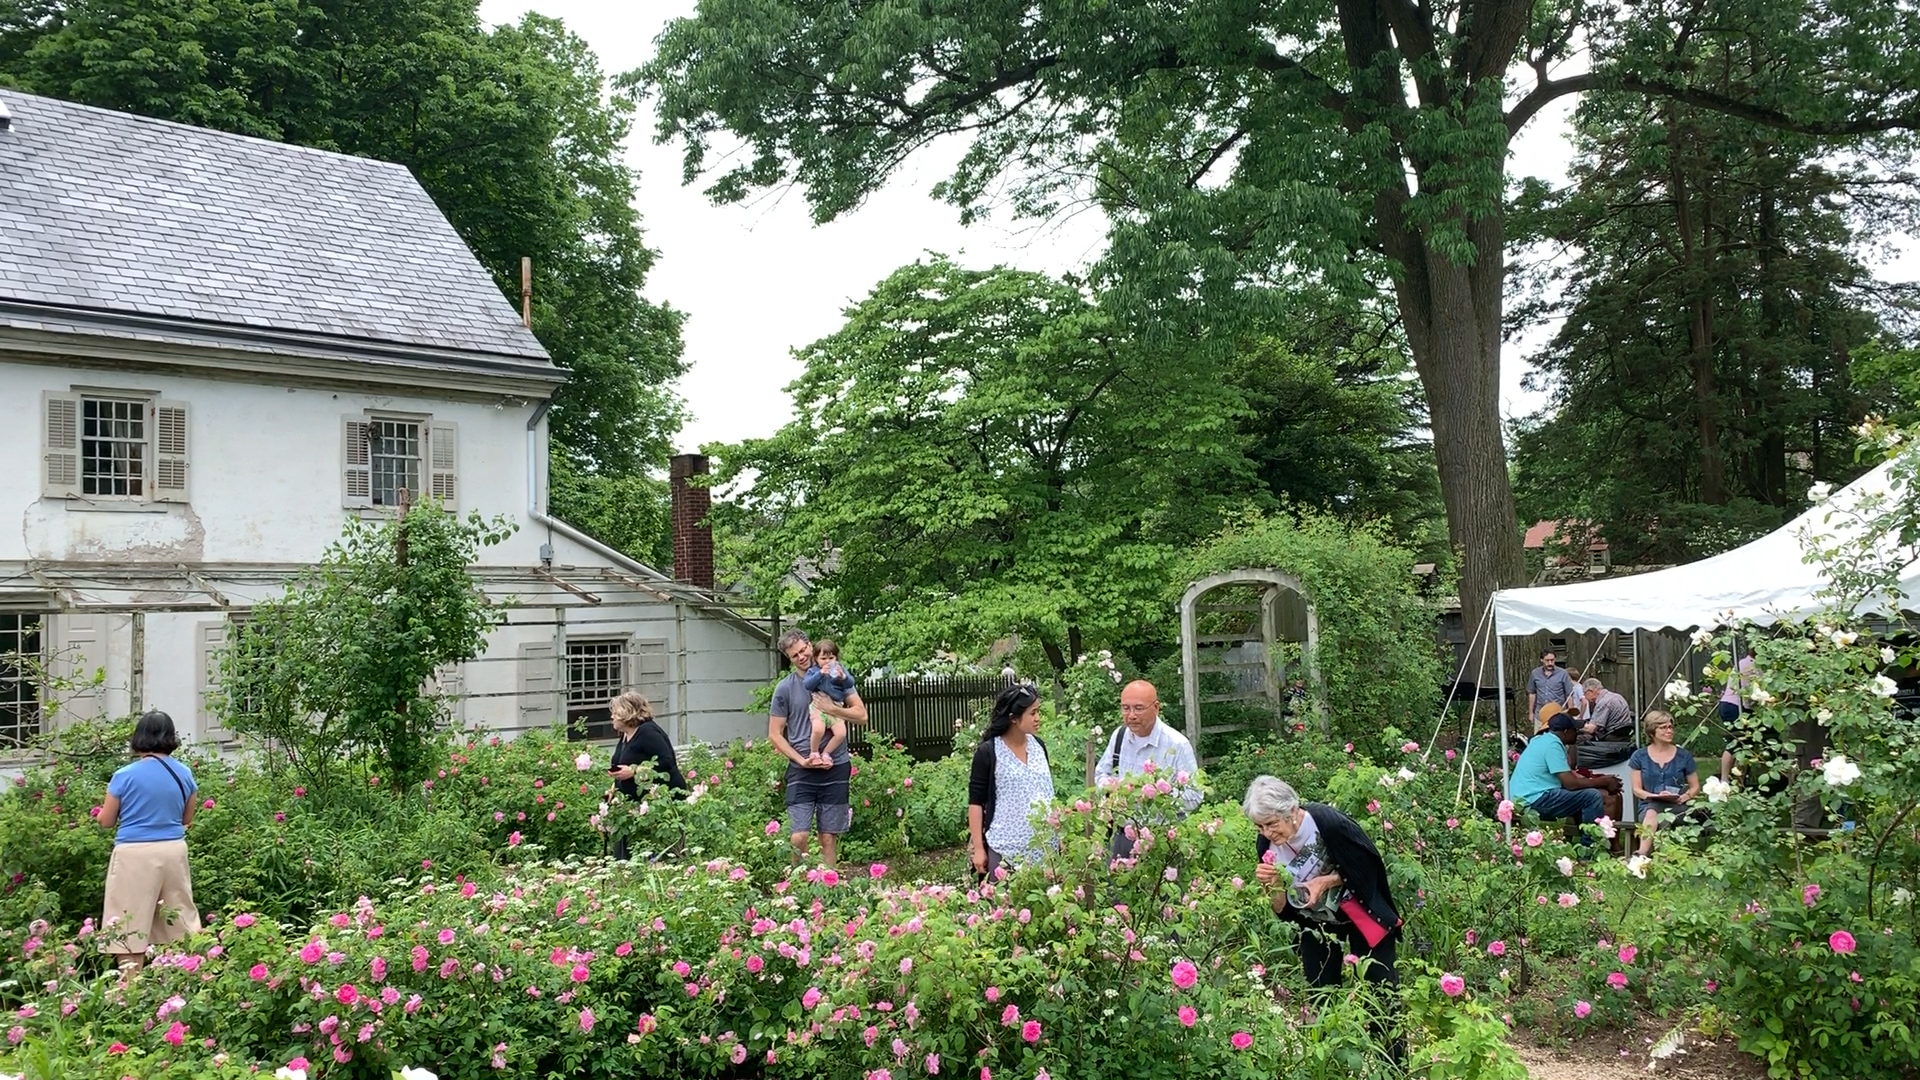 People in the rose garden. In the foreground a woman bends over to smell a rose. 